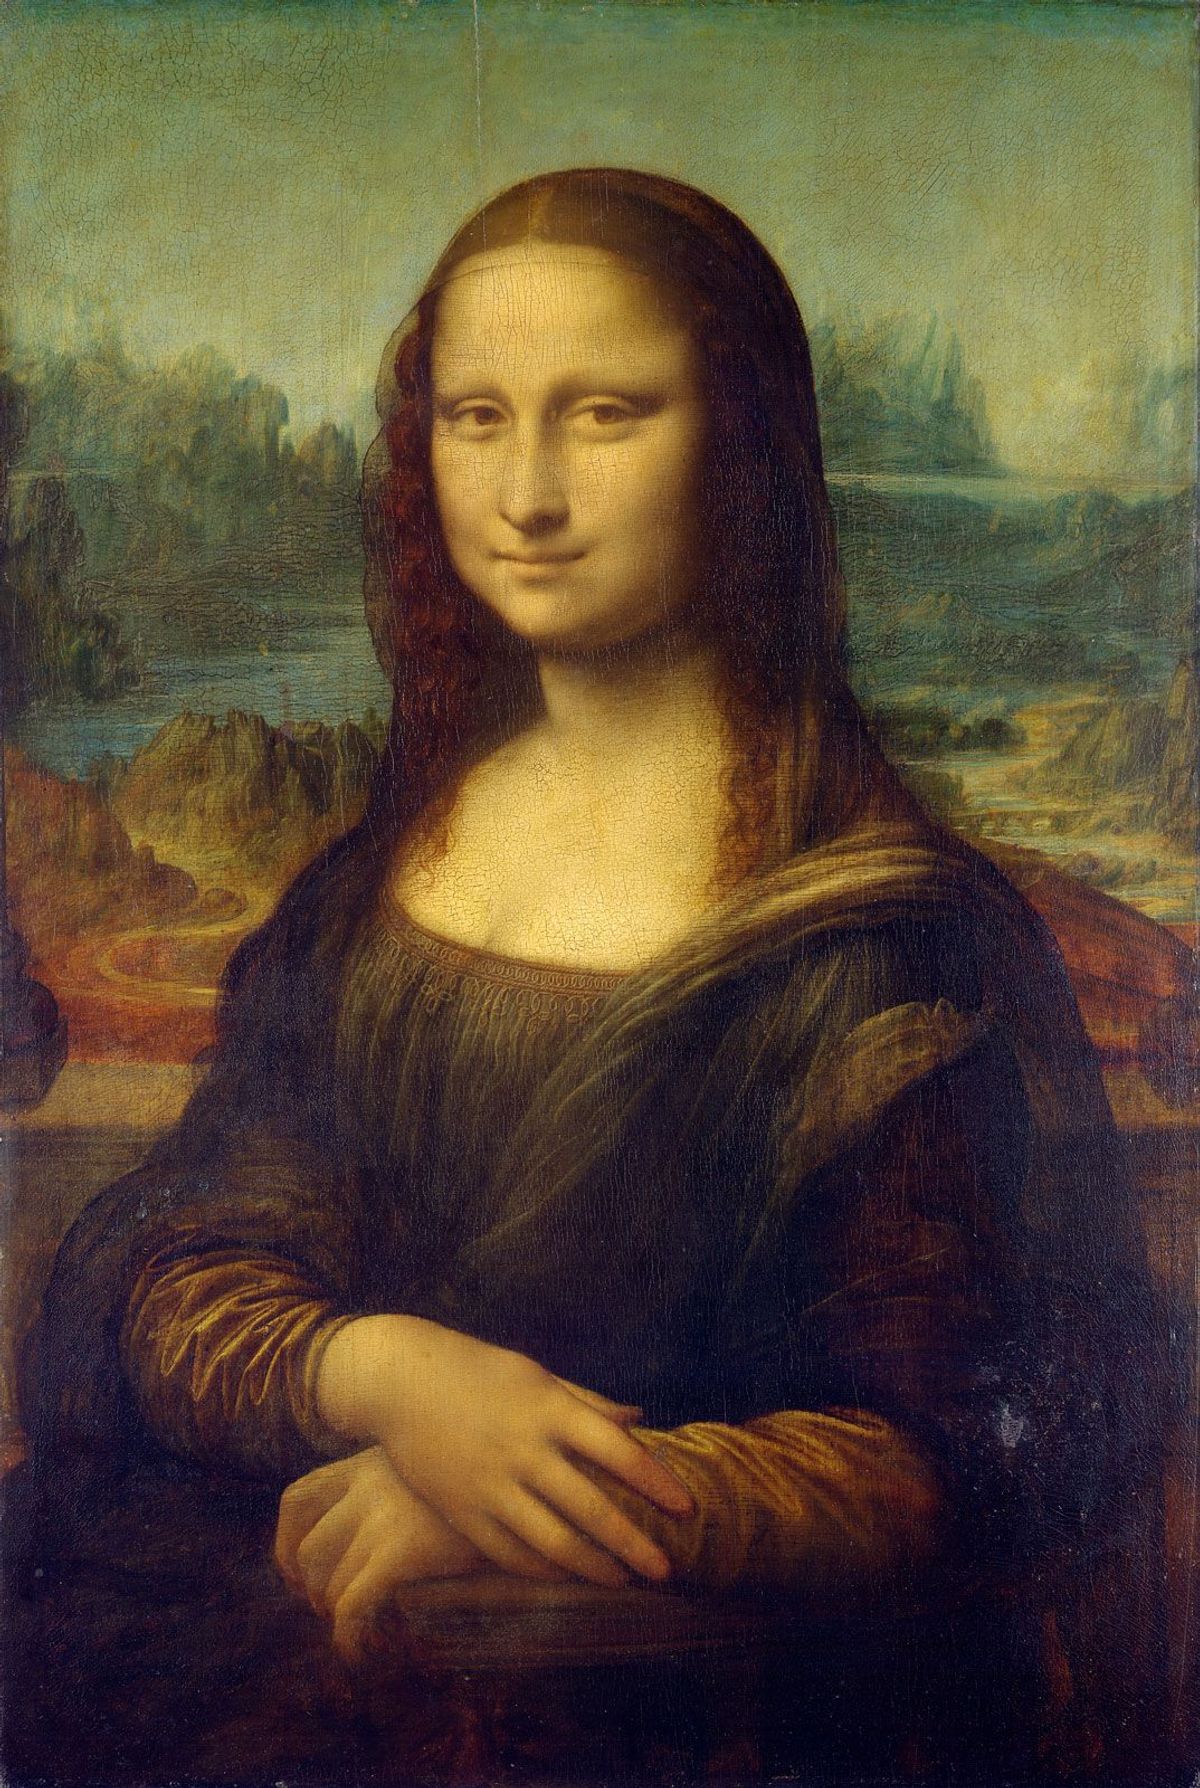 Ann Pizzorusso’s theory is the latest in a string of them about Leonardo da Vinci’s Mona Lisa (around 1503-19)